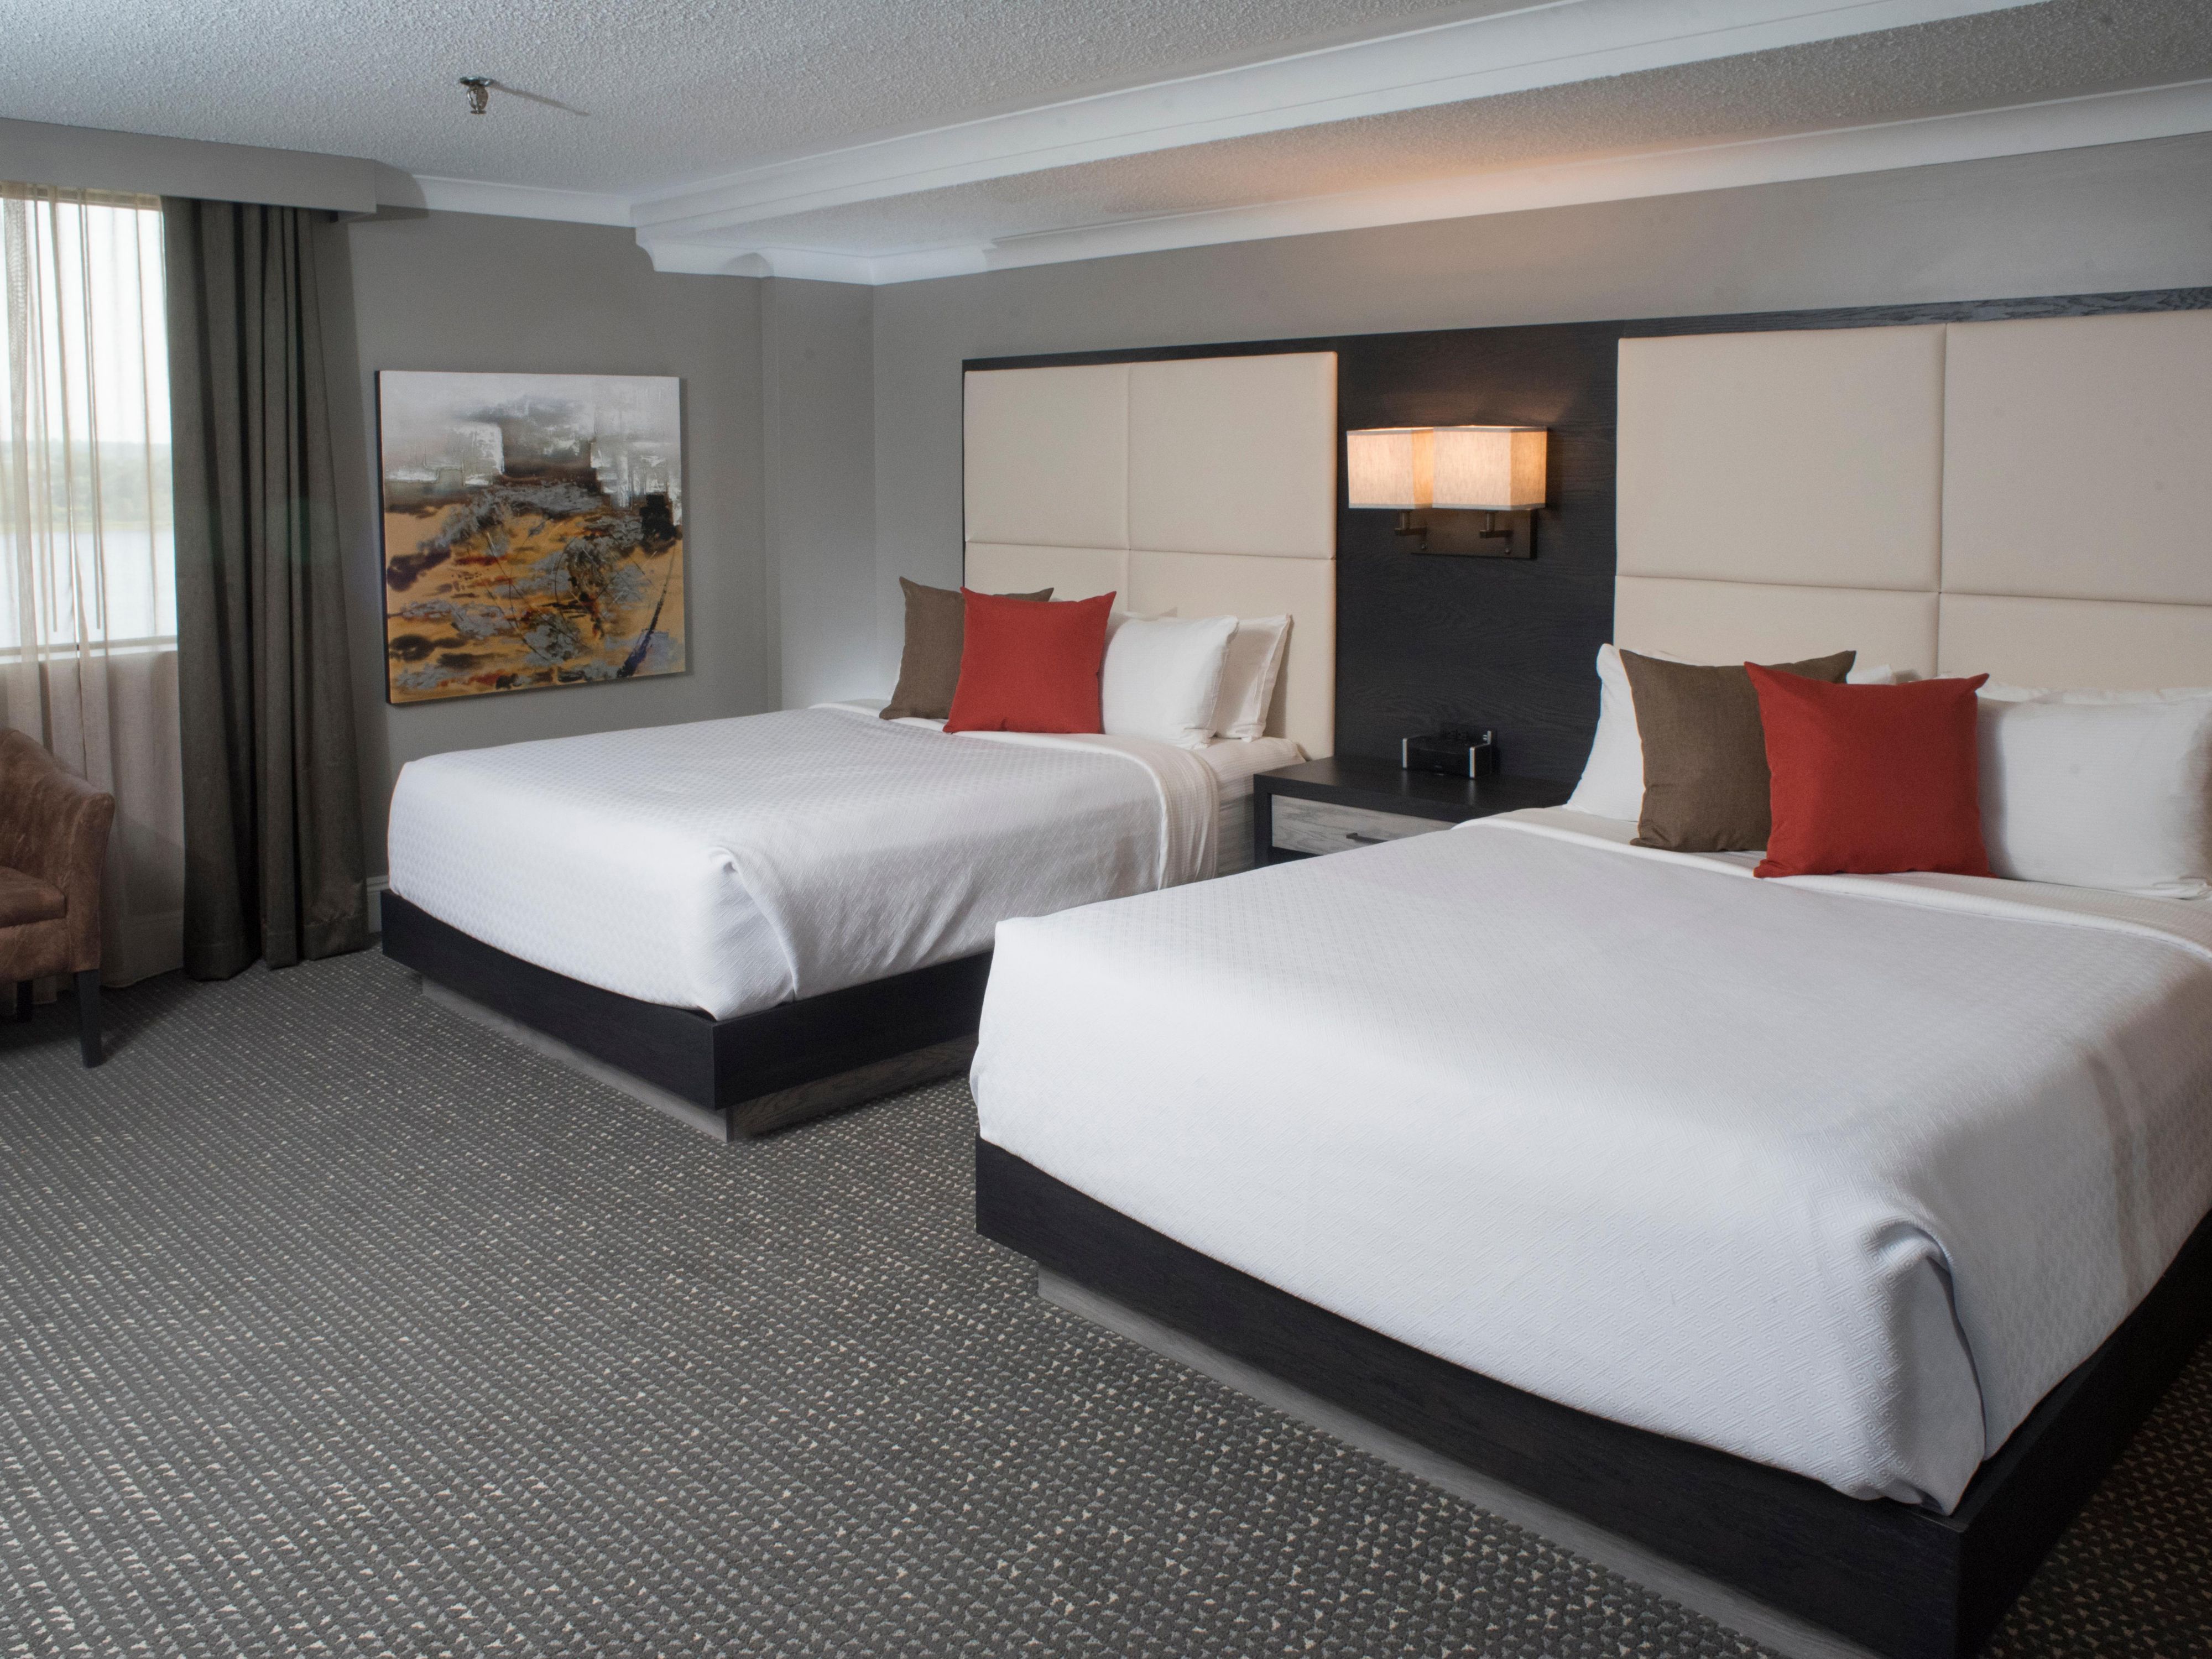 Relax in our clean, fresh, spacious double bed guest rooms